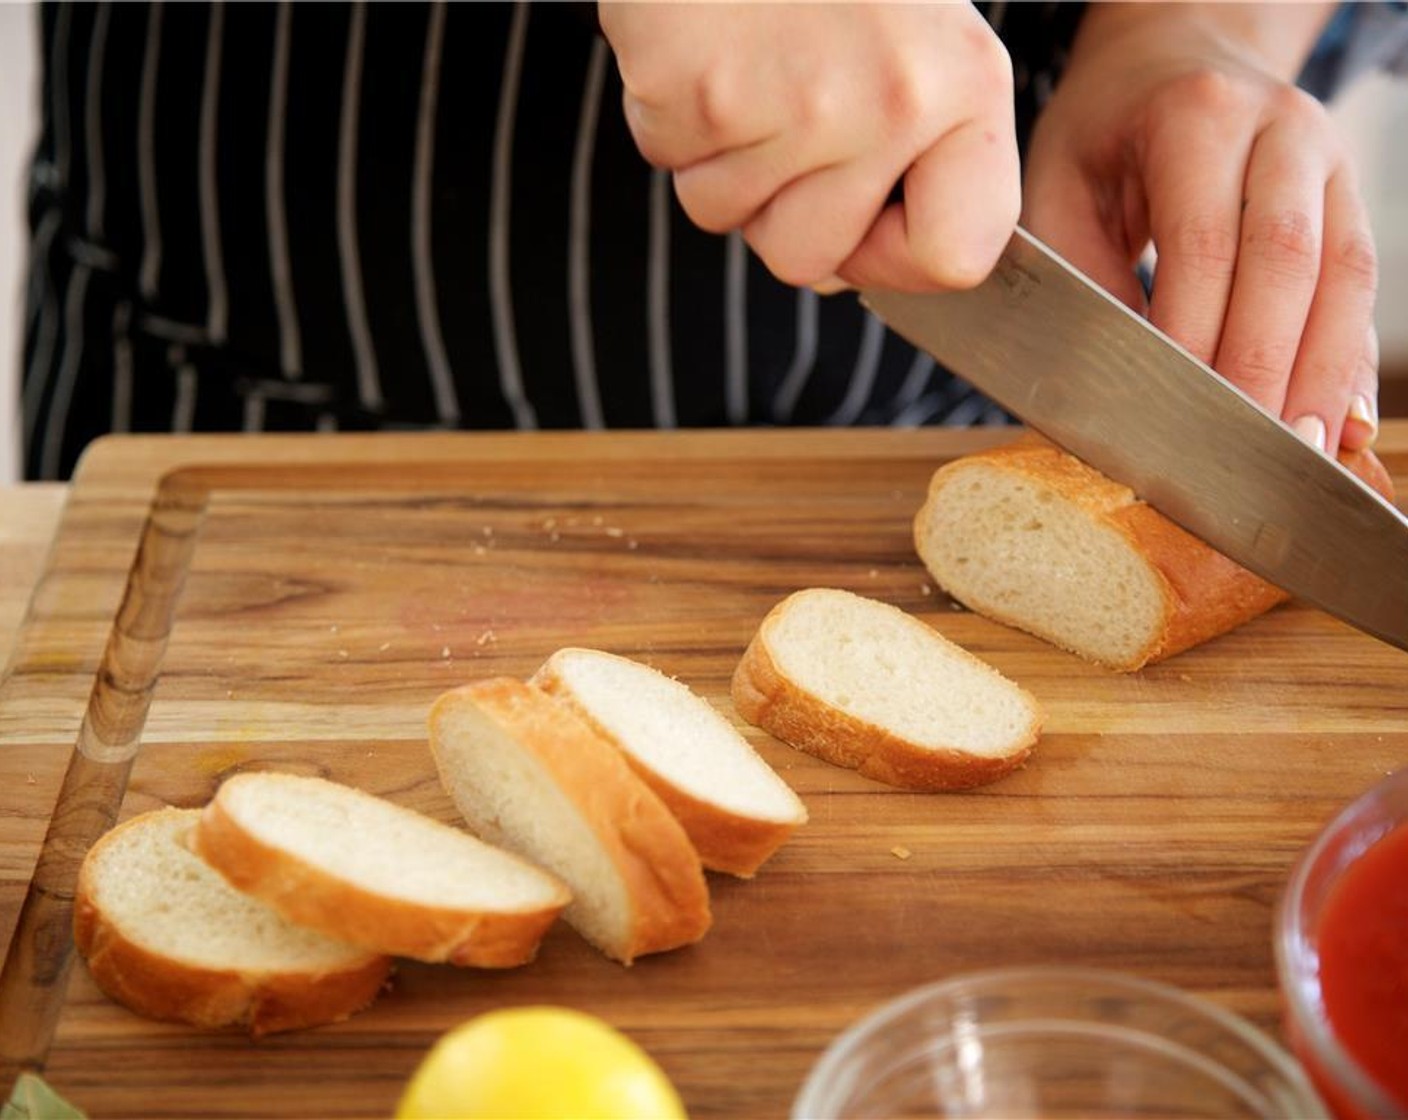 step 2 Slice Baguettes (2) on a bias into eight one inch thick slices. Drizzle a small amount of olive oil onto each piece of bread and place on a baking sheet. Peel Carrot (1) and dice into quarter inch pieces. Peel and chop Onion (1) into quarter inch pieces.